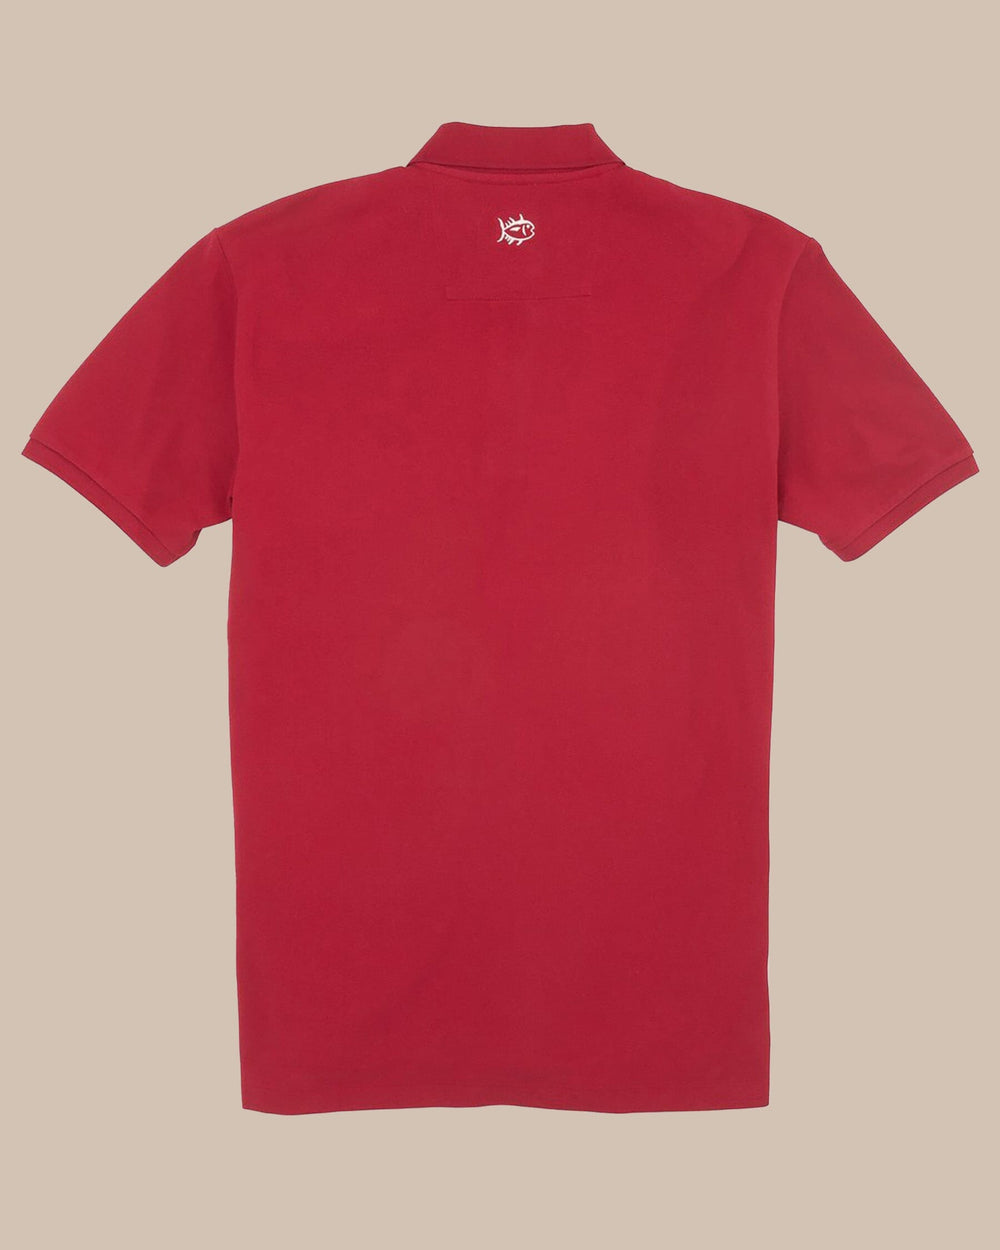 The back view of the Men's Red Skipjack Gameday Colors Polo Shirt by Southern Tide - Crimson